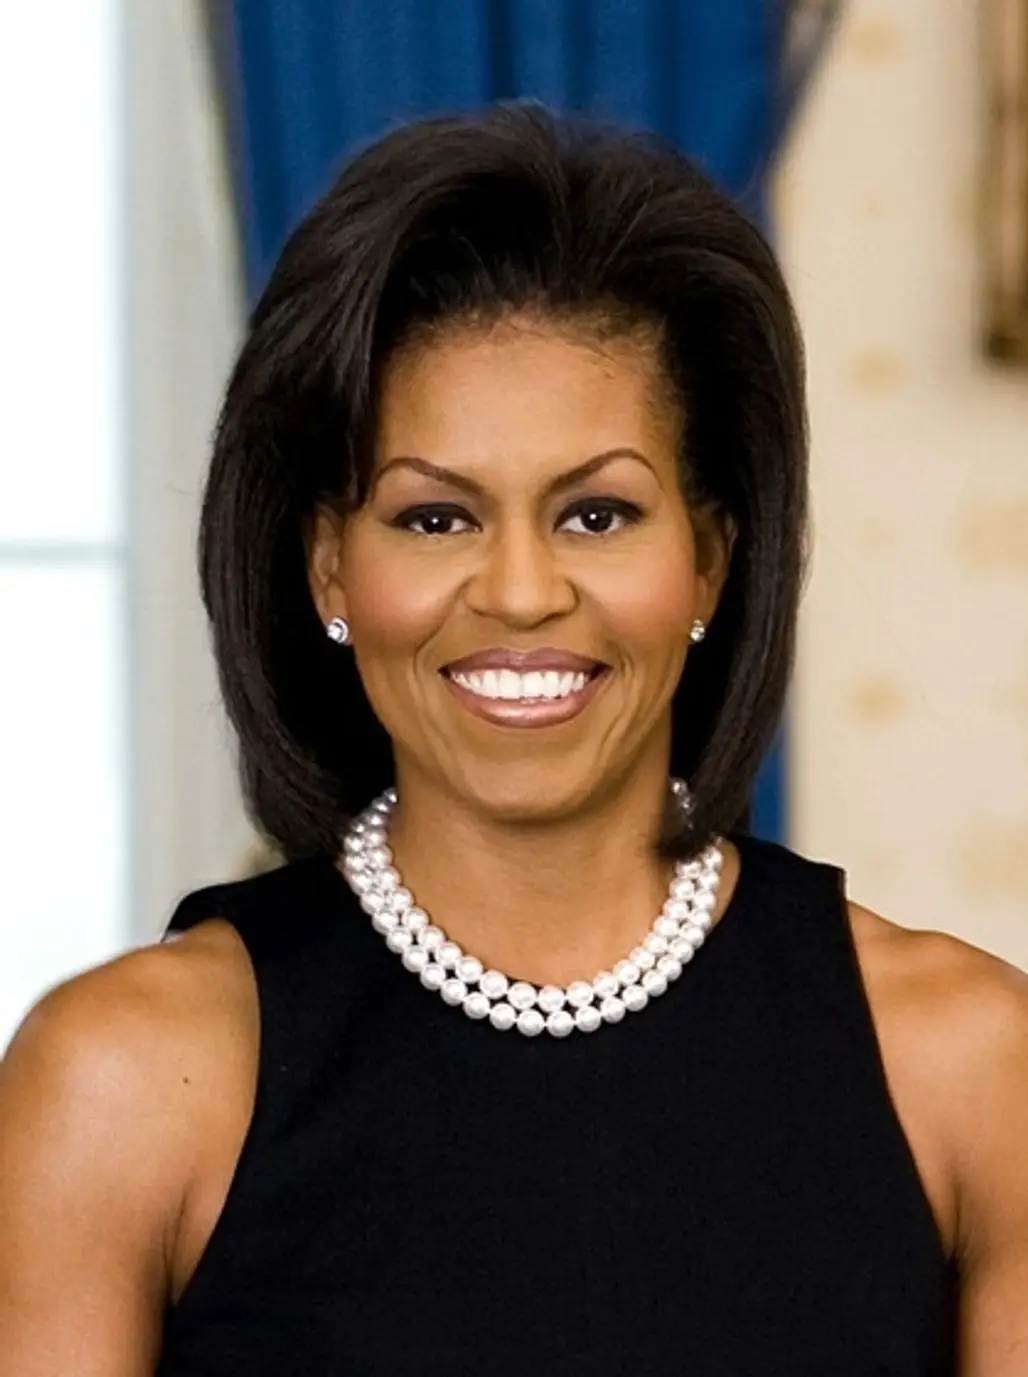 Michelle Obama, First African-American First Lady of the United States of America